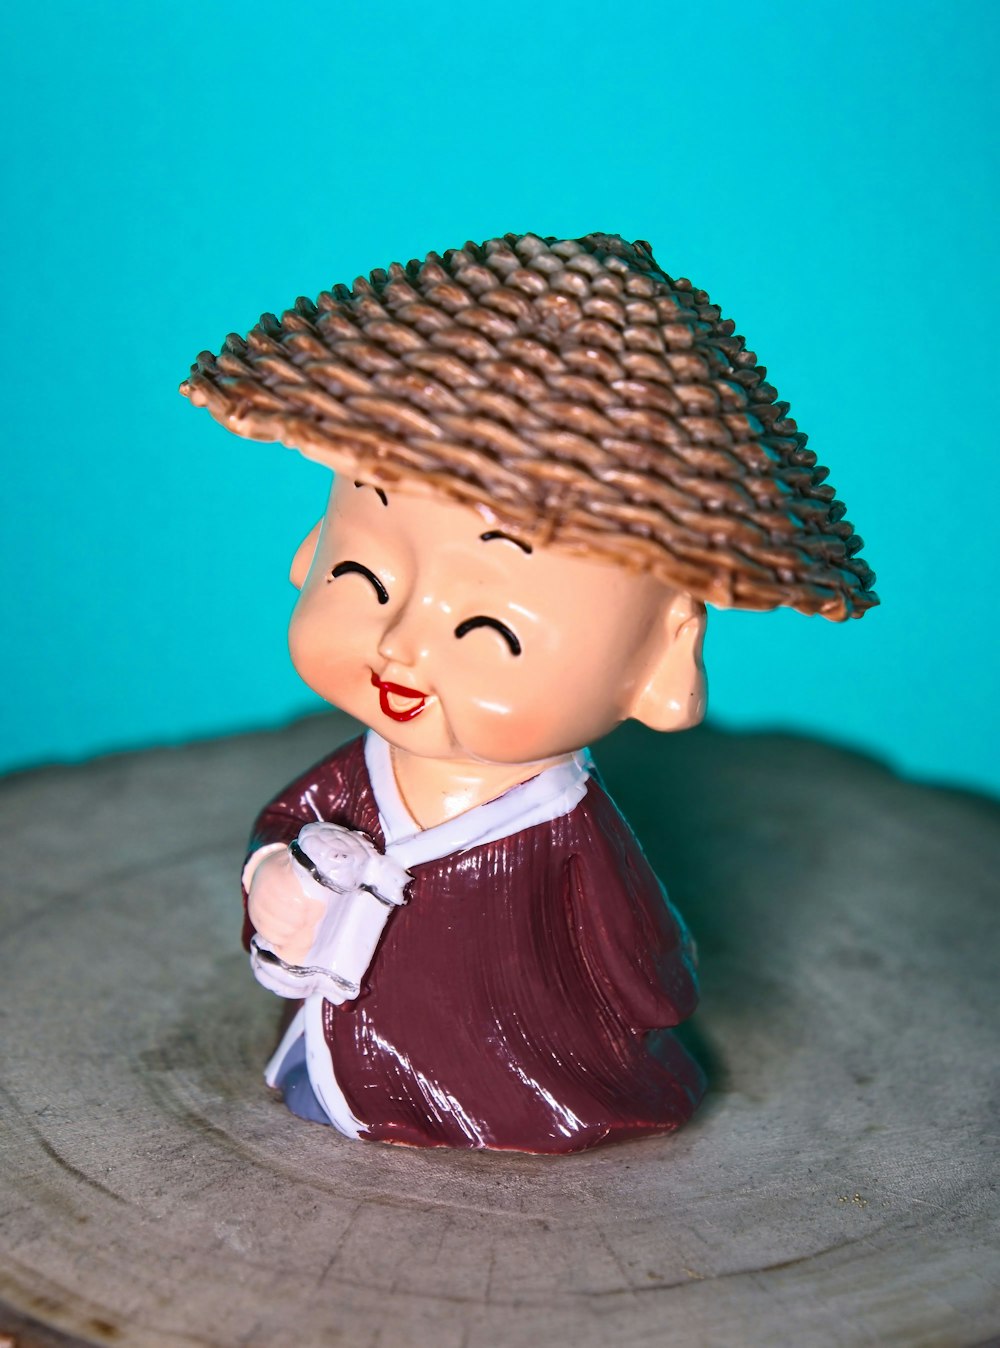 a small figurine of a boy with a straw hat